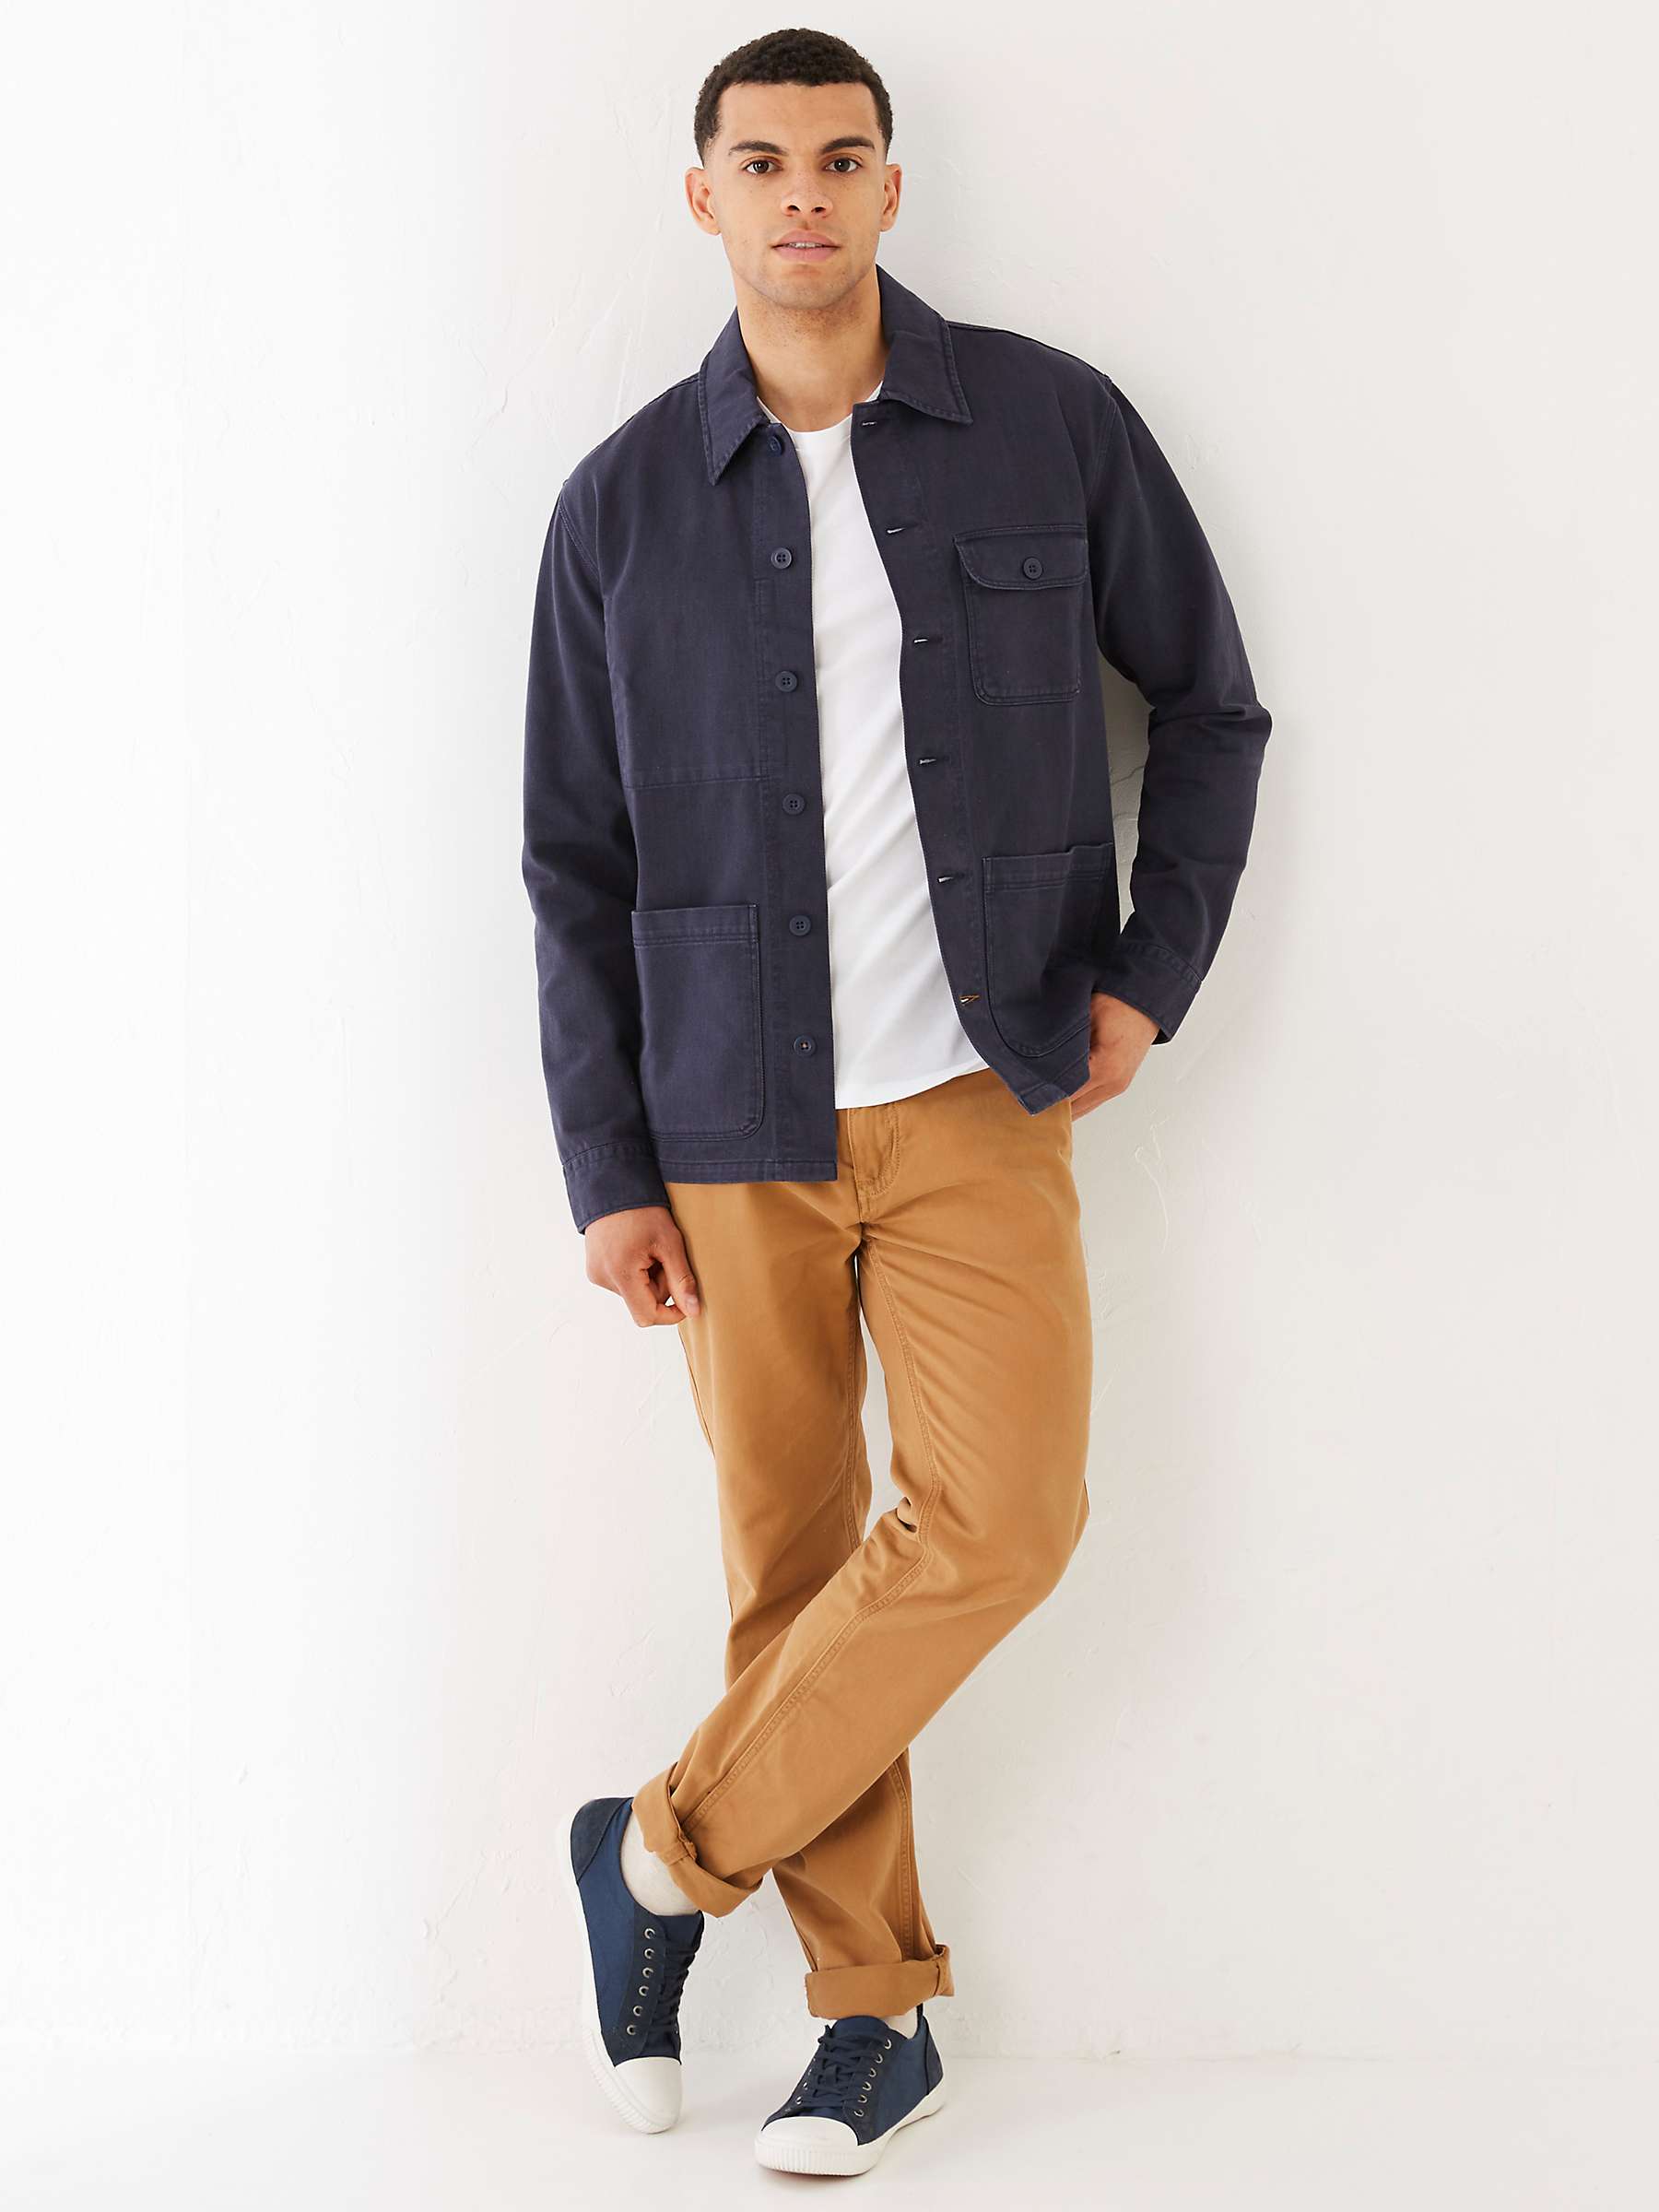 FatFace Cotton Worker Jacket, Navy Blue at John Lewis & Partners